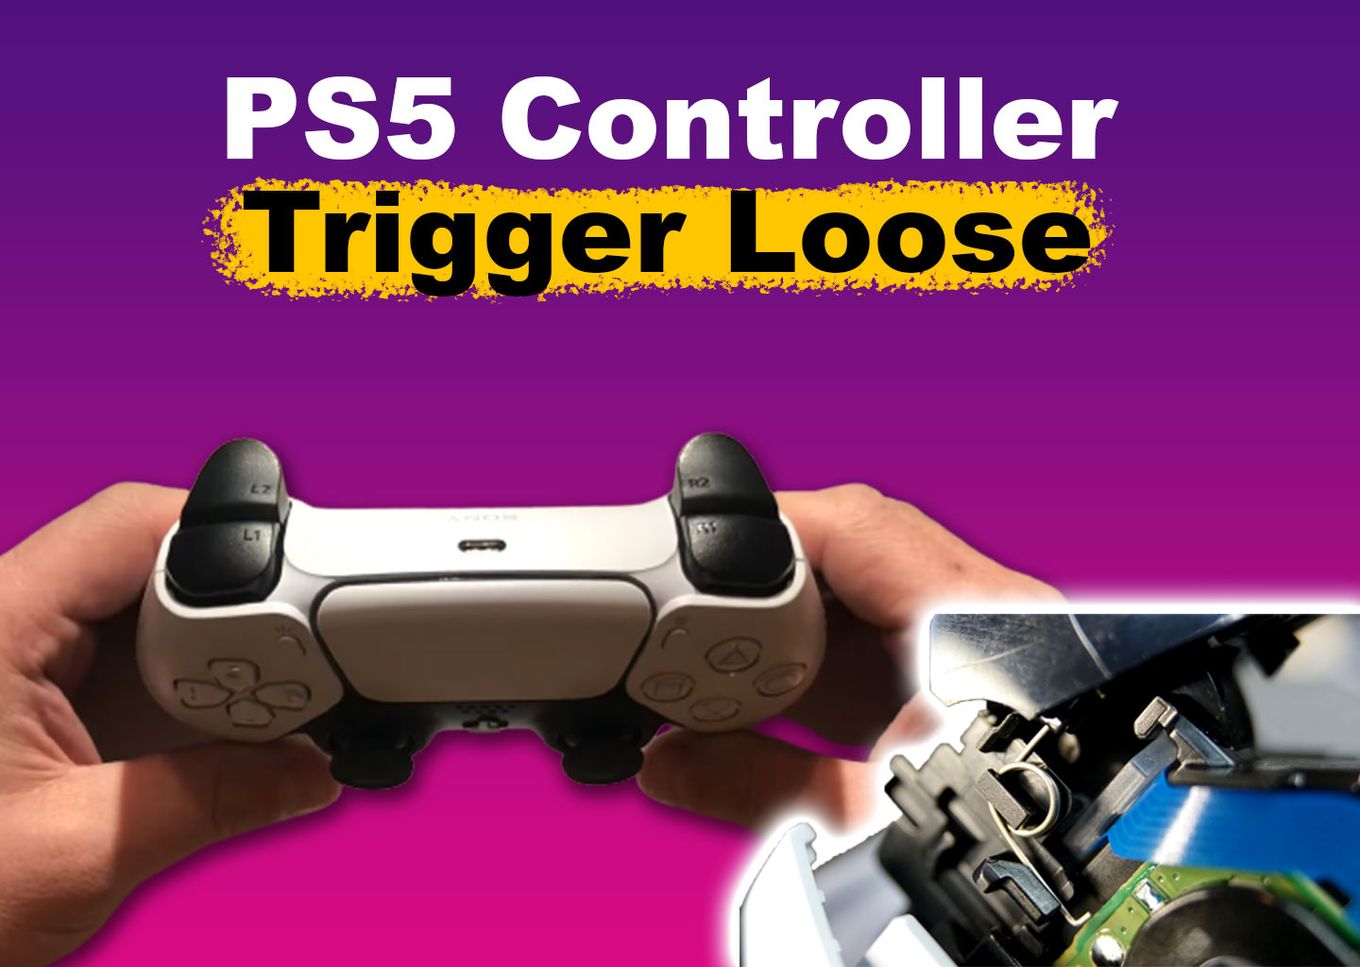 PS5 Controller Trigger Loose